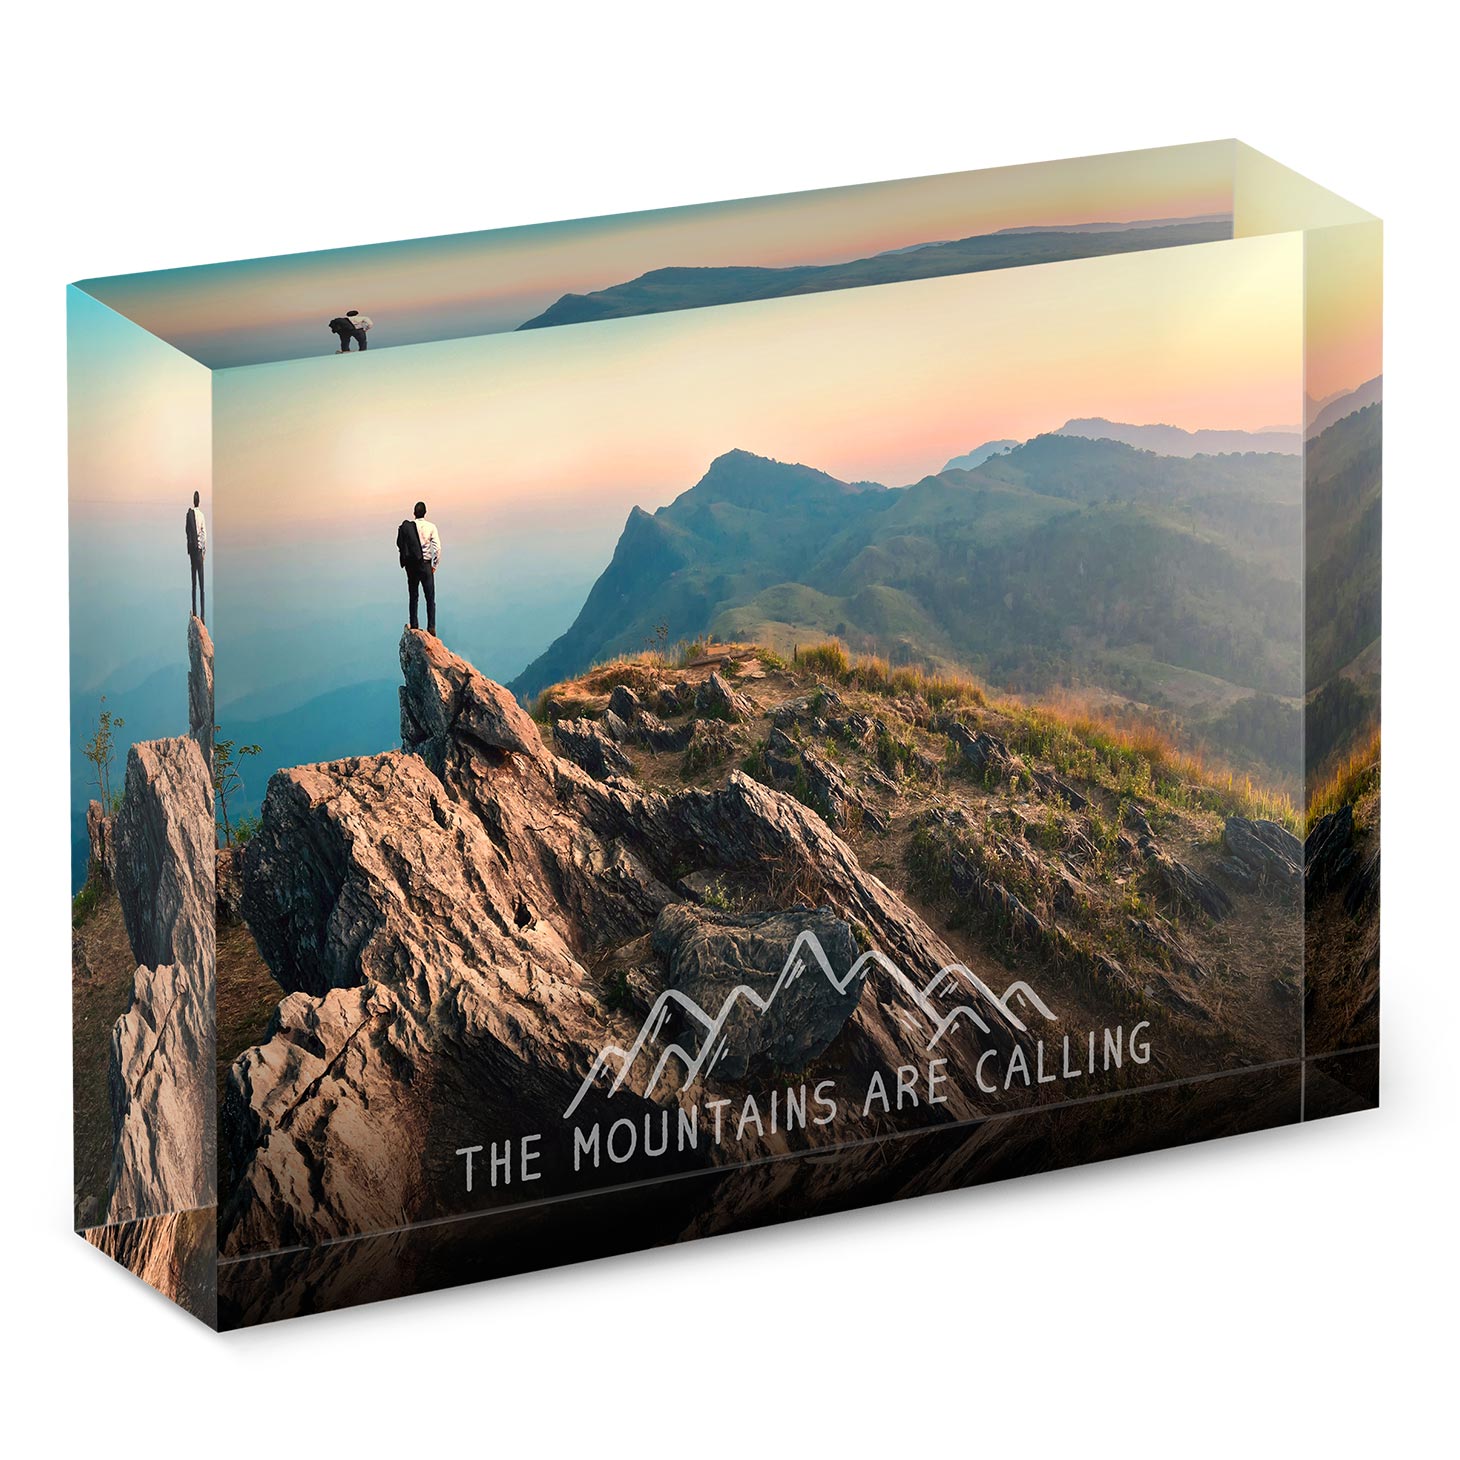 The Mountains are Calling - Engraved Acrylic Blocks